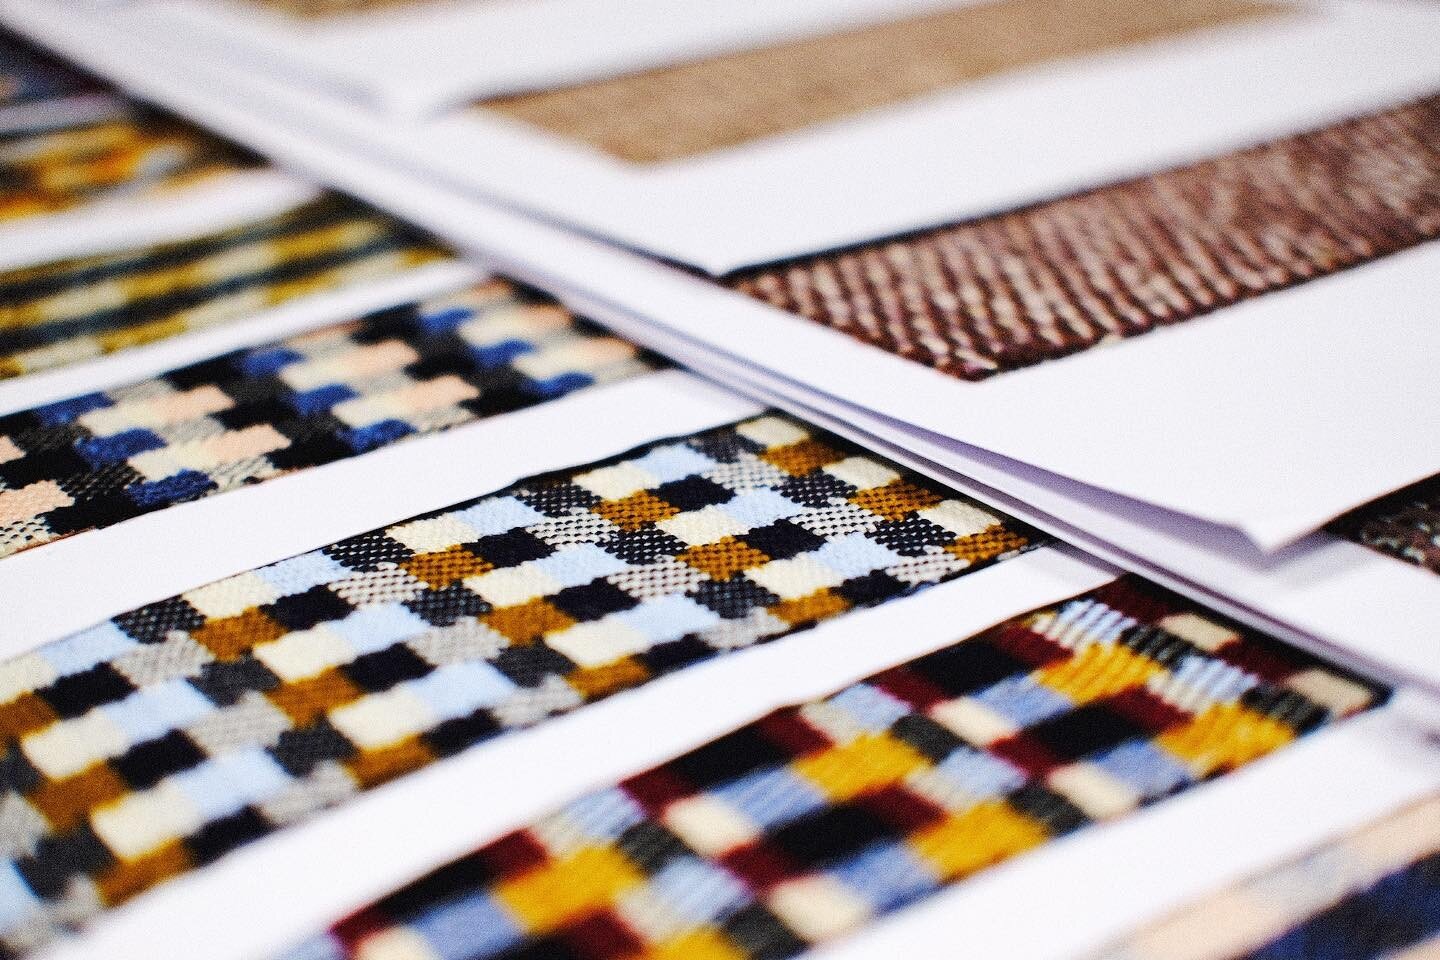 After a nice long break we are back in the studio working on our next collection 🎉 

#woven #textiledesign #weaversofinstagram #blocks #fabricdesign #textile #handwoven #handwoventextiles